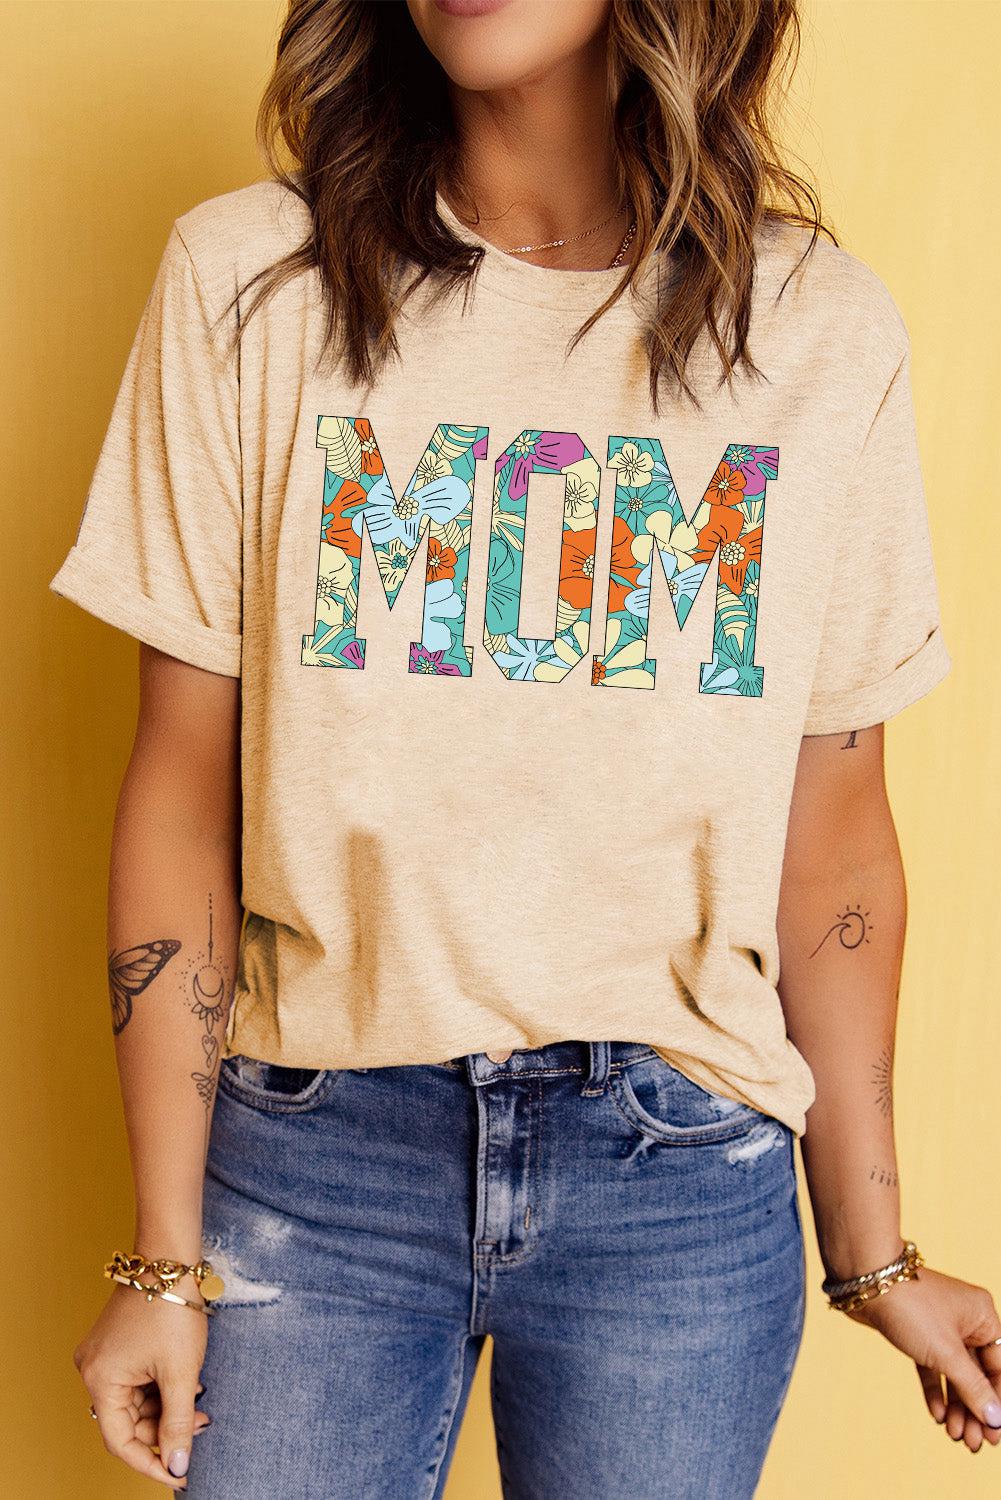 MOM Floral Graphic T-Shirt BLUE ZONE PLANET